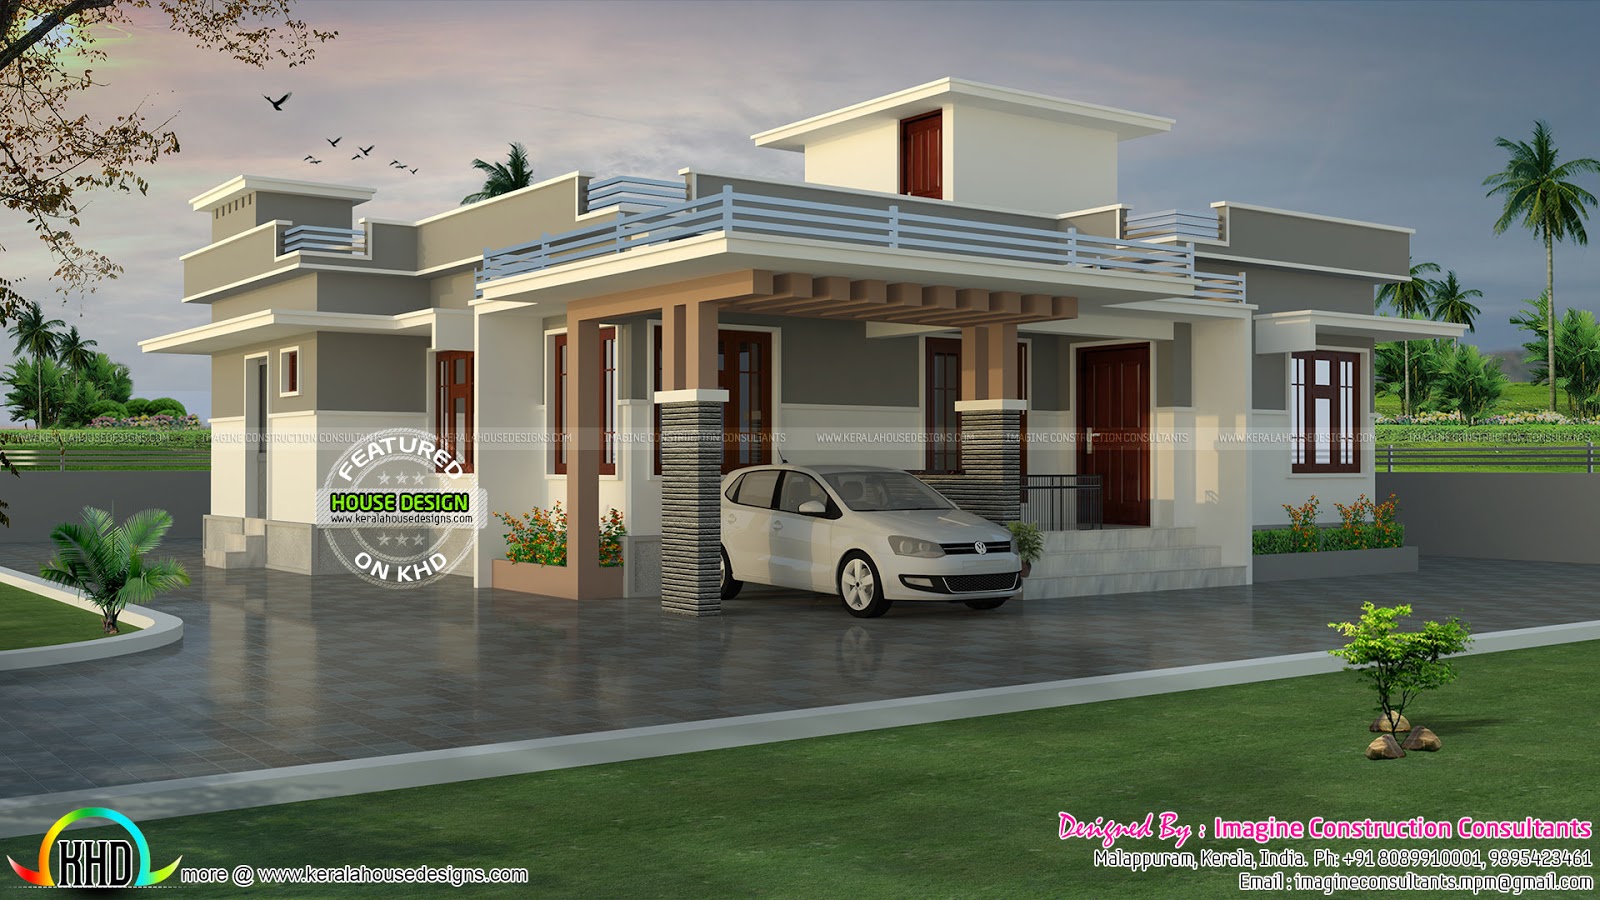  1200  sq  ft  Rs 18 lakhs cost estimated house  plan  Home  